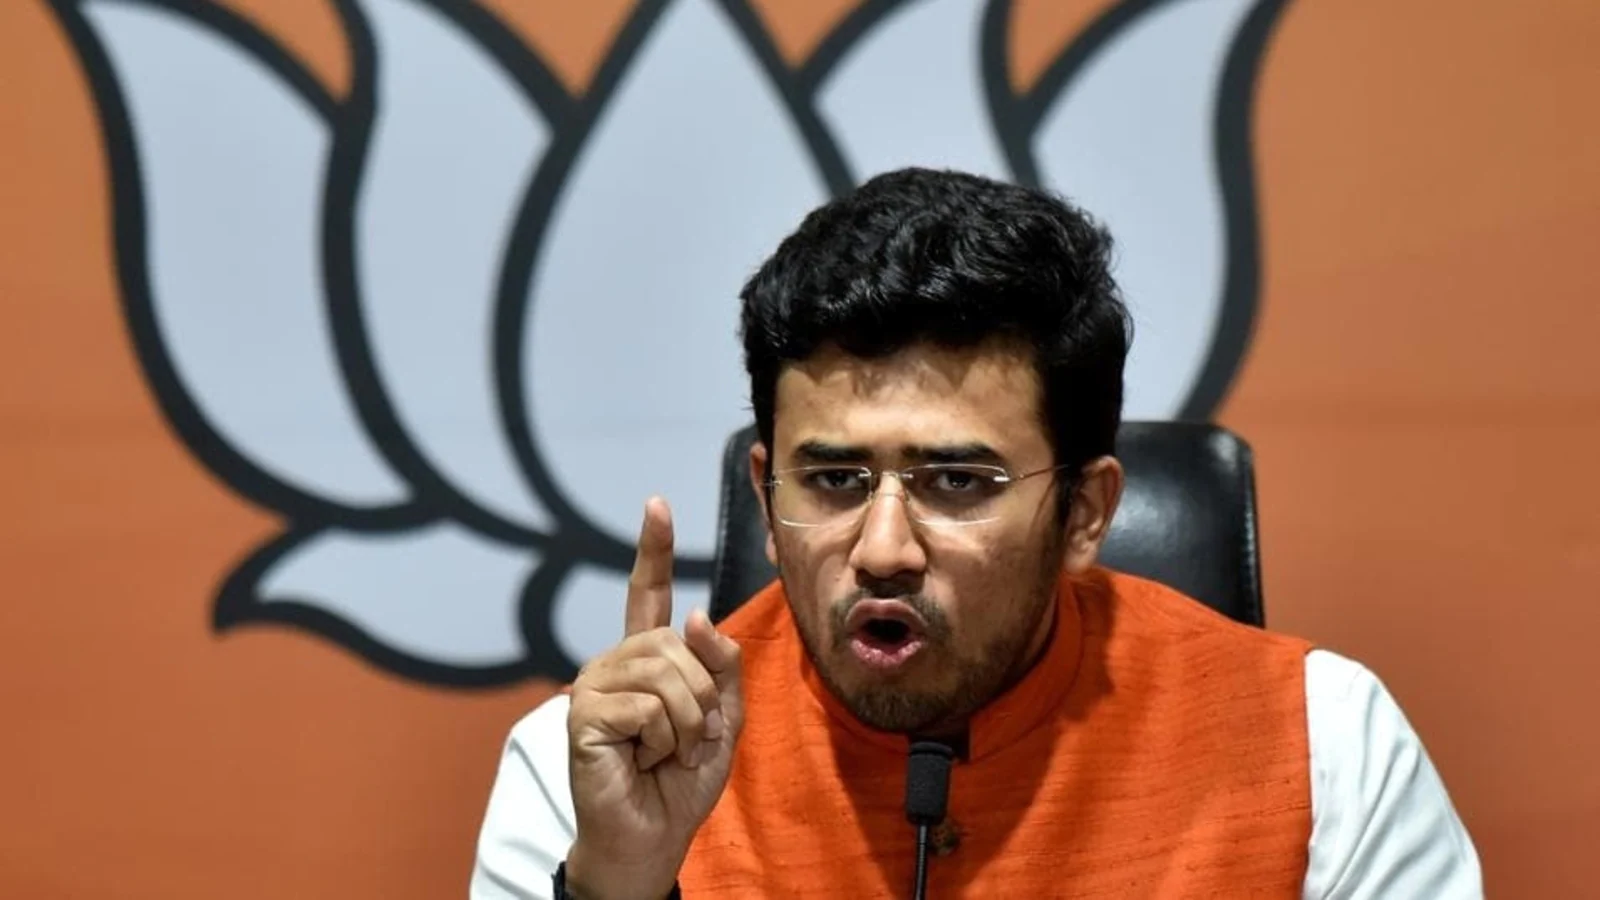 Will protest till he issues apology, says Tejasvi Surya over Kejriwal’s remark on ‘The Kashmir Files’